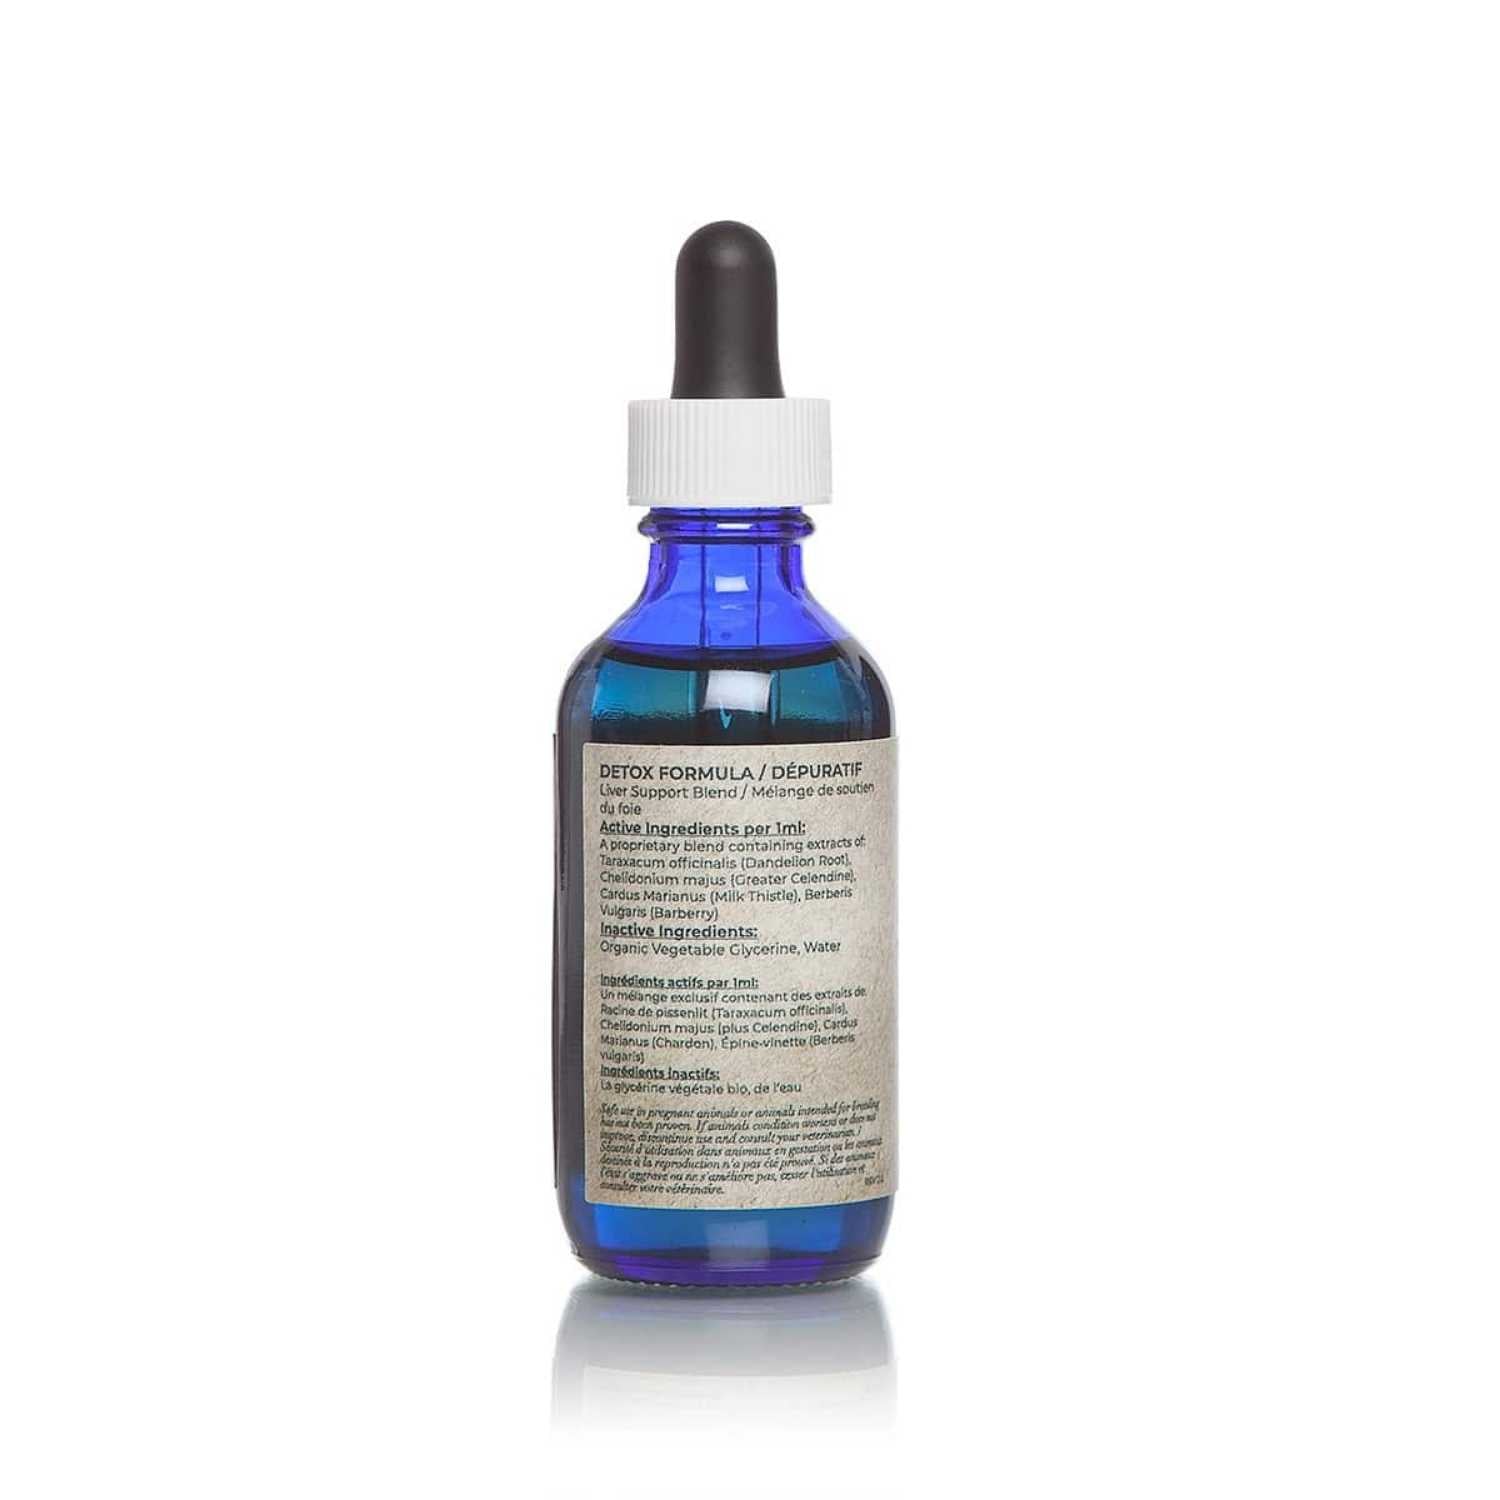 Adored Beast Apothecary Liver Tonic Support Detoxifier 60ml Bottle Ingredients